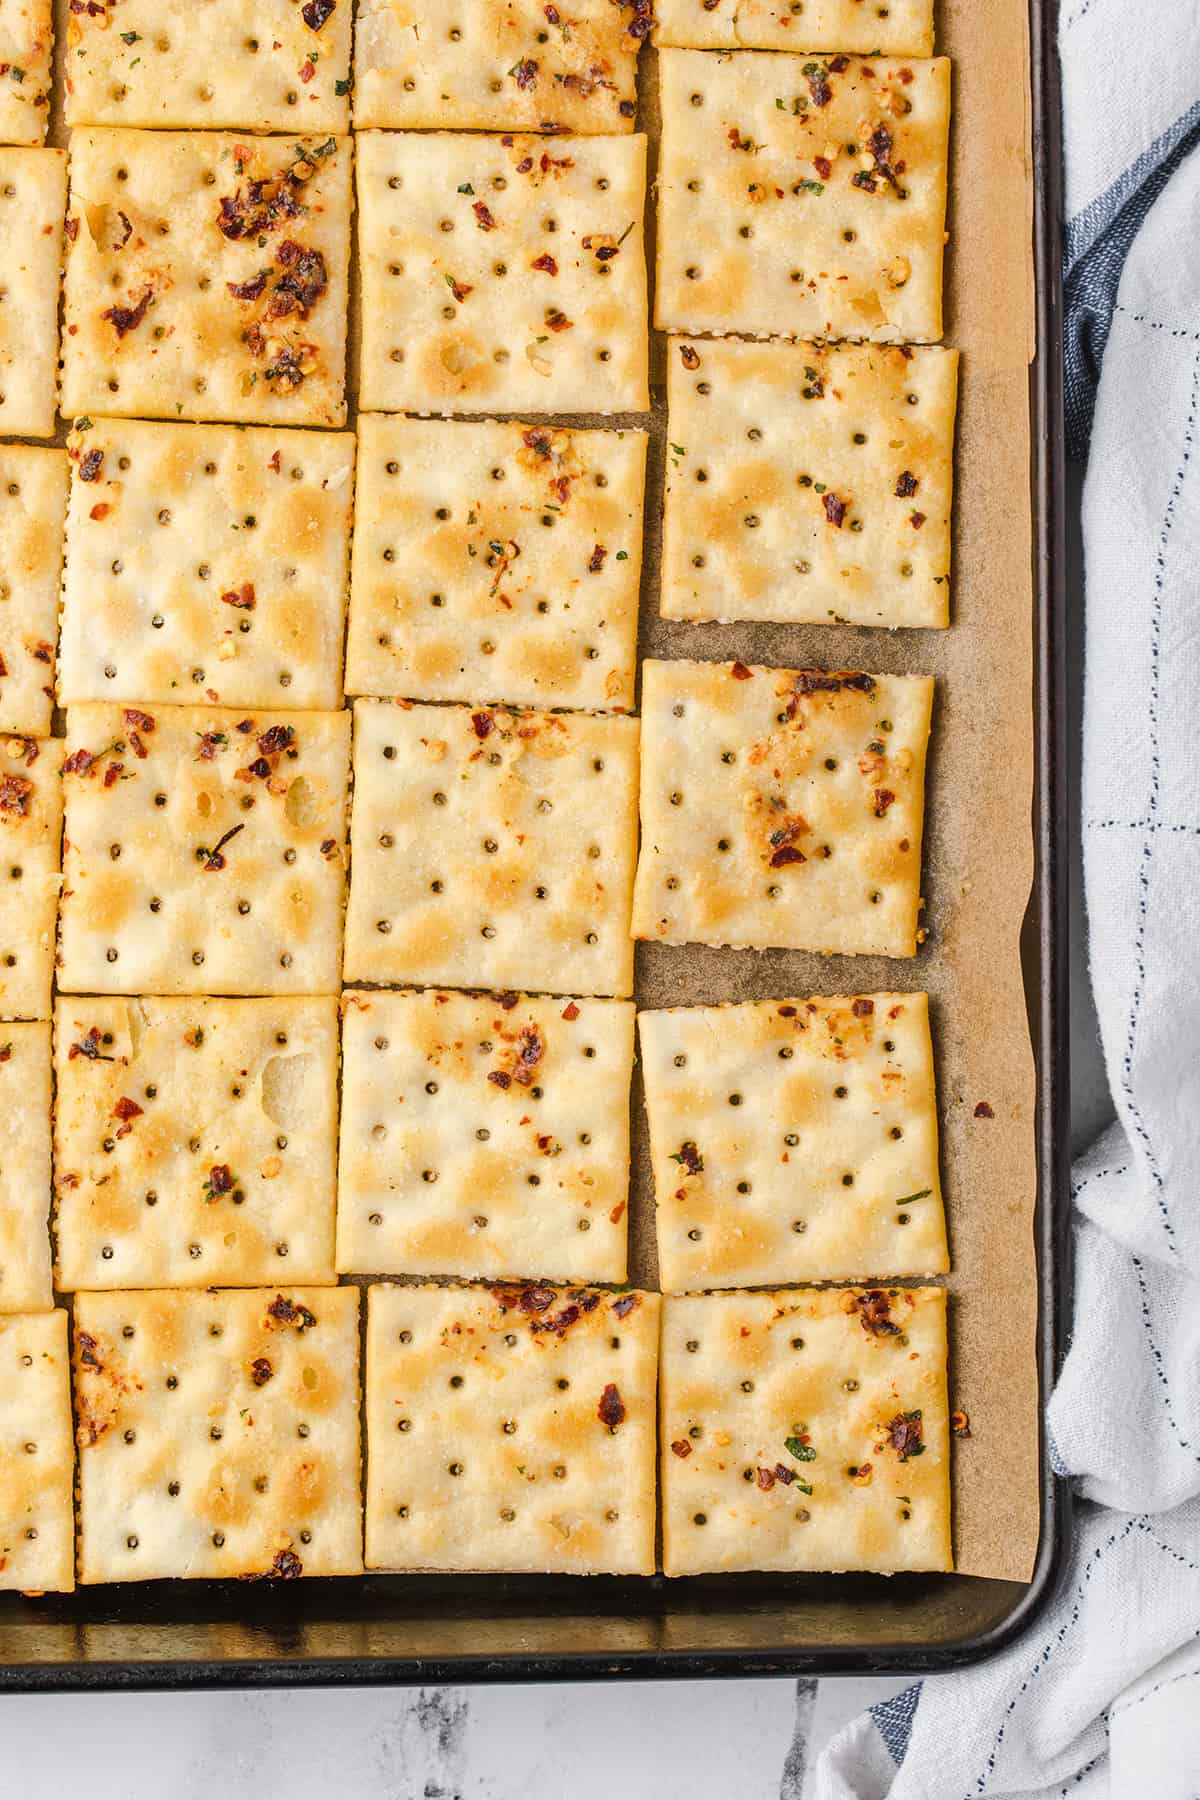 Crackers after baking.